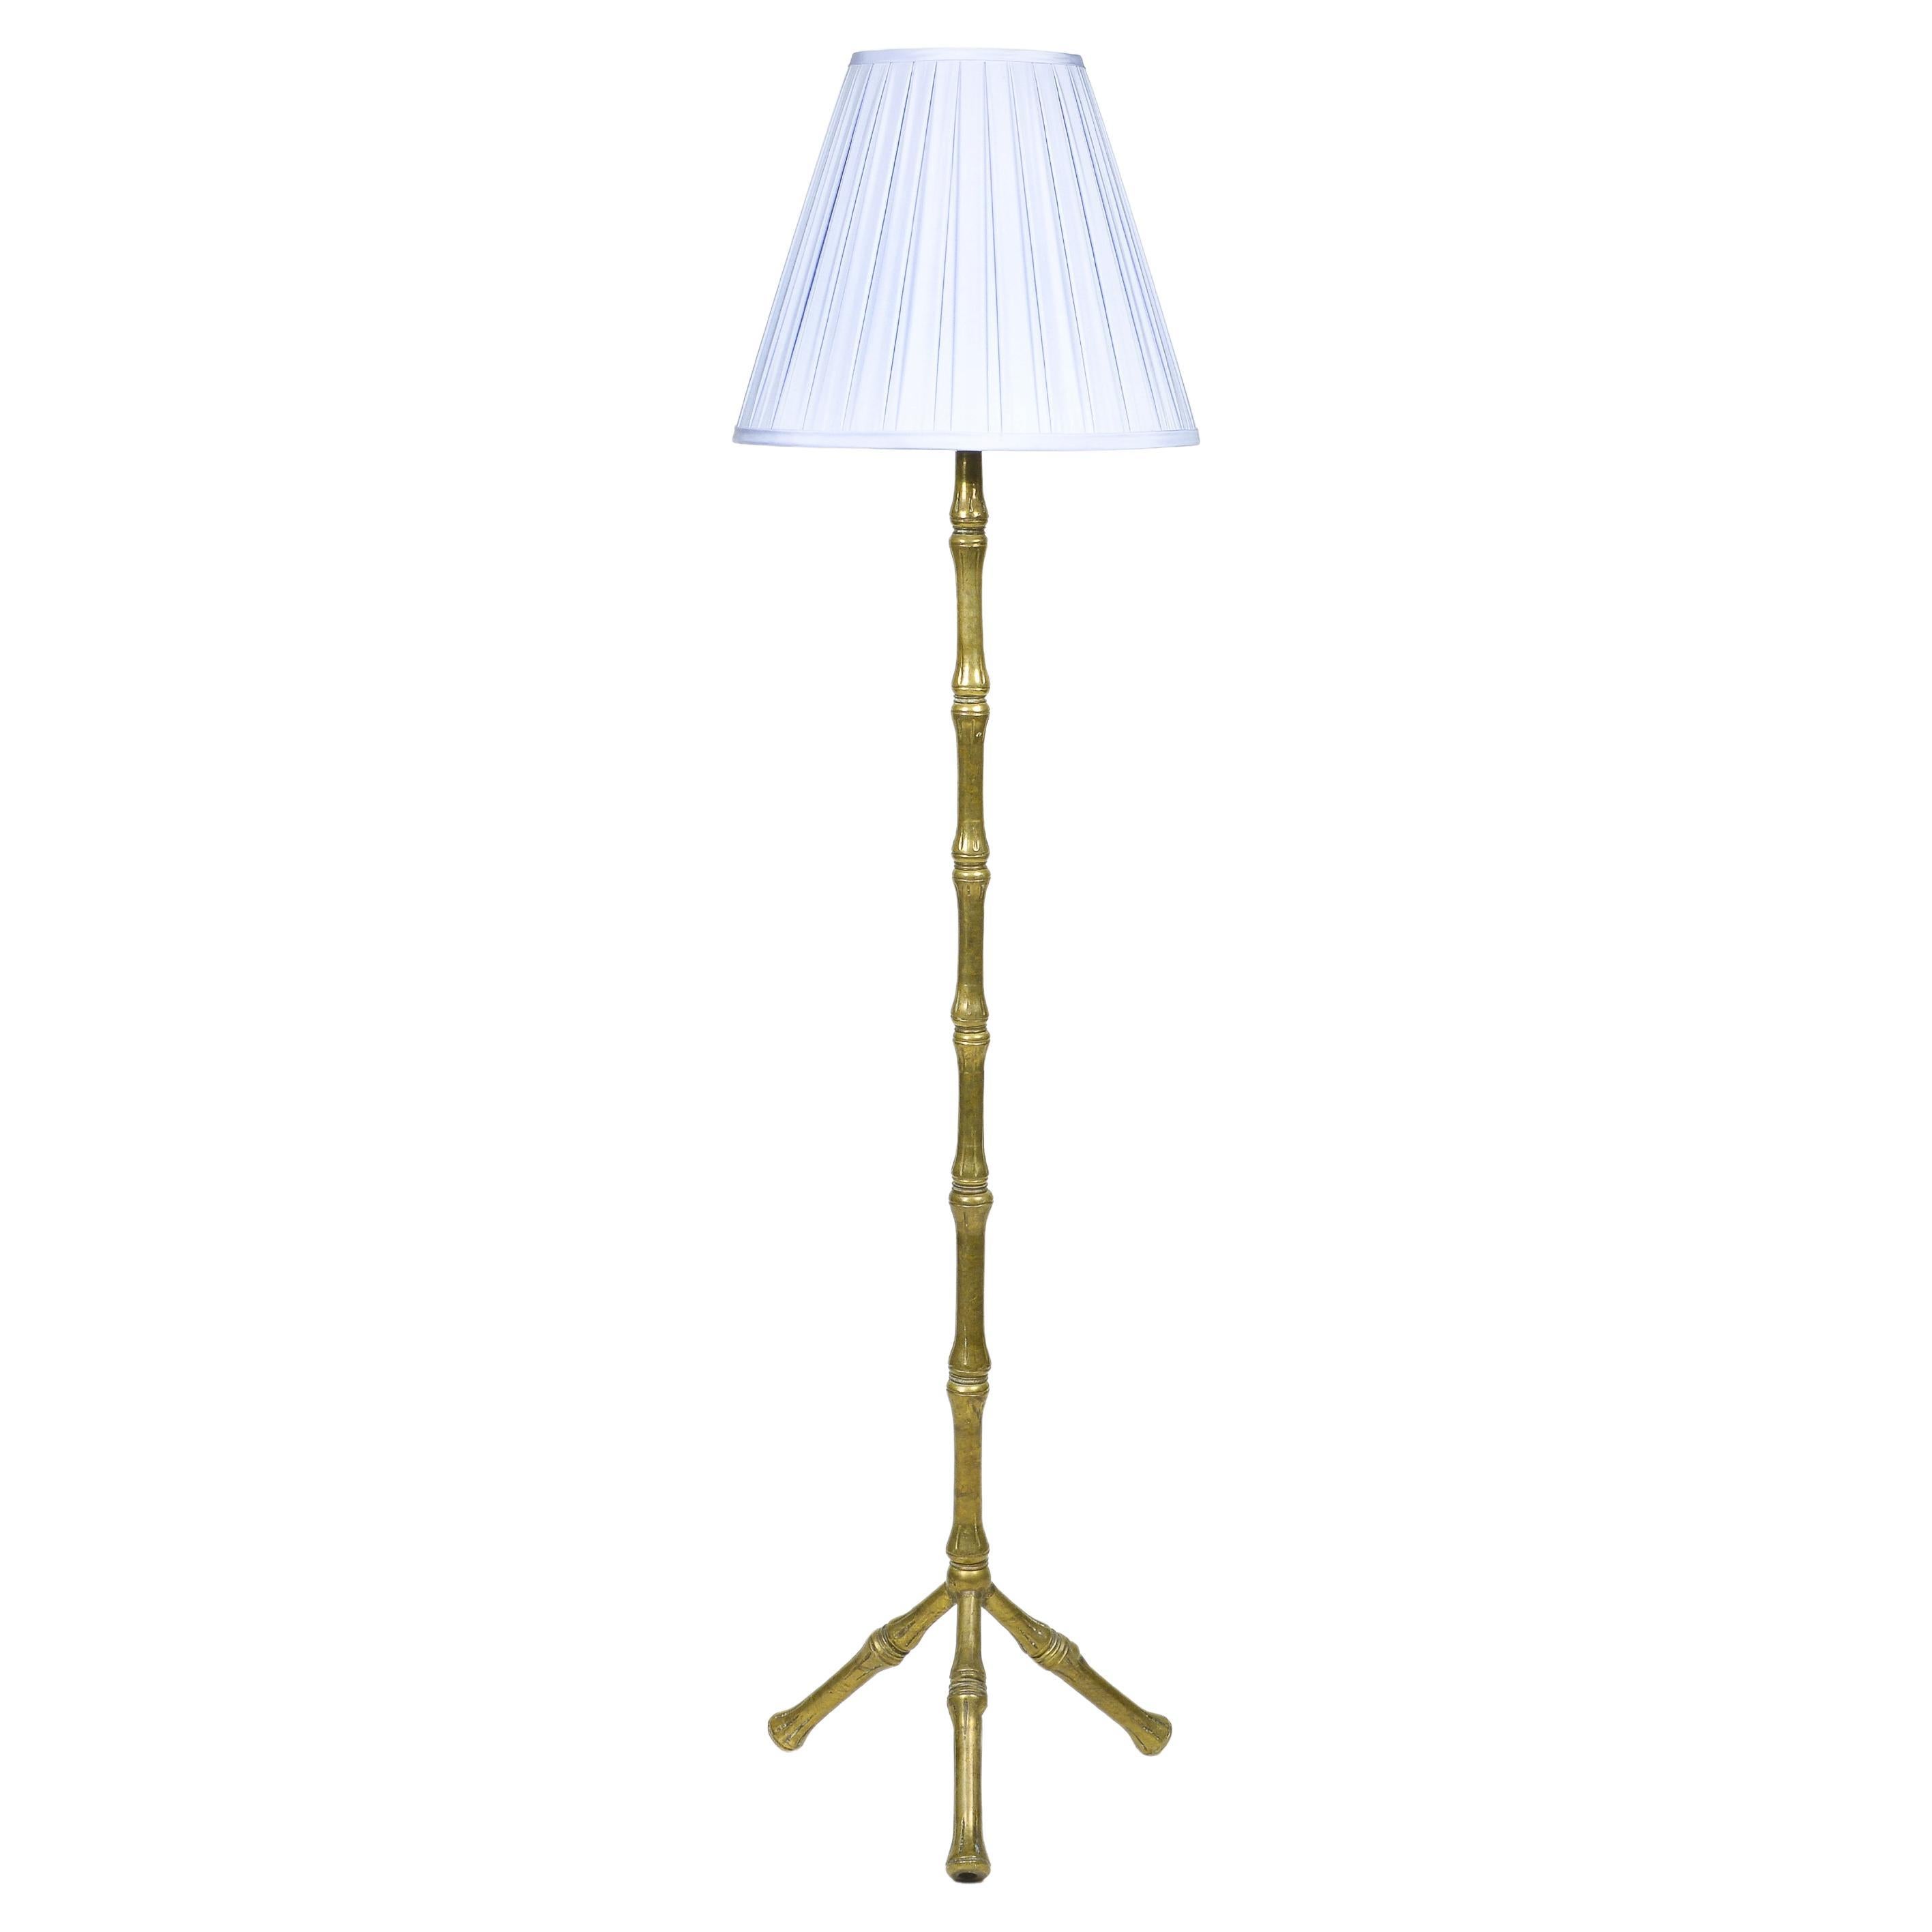 A Bronze Faux Bamboo Stehlampe